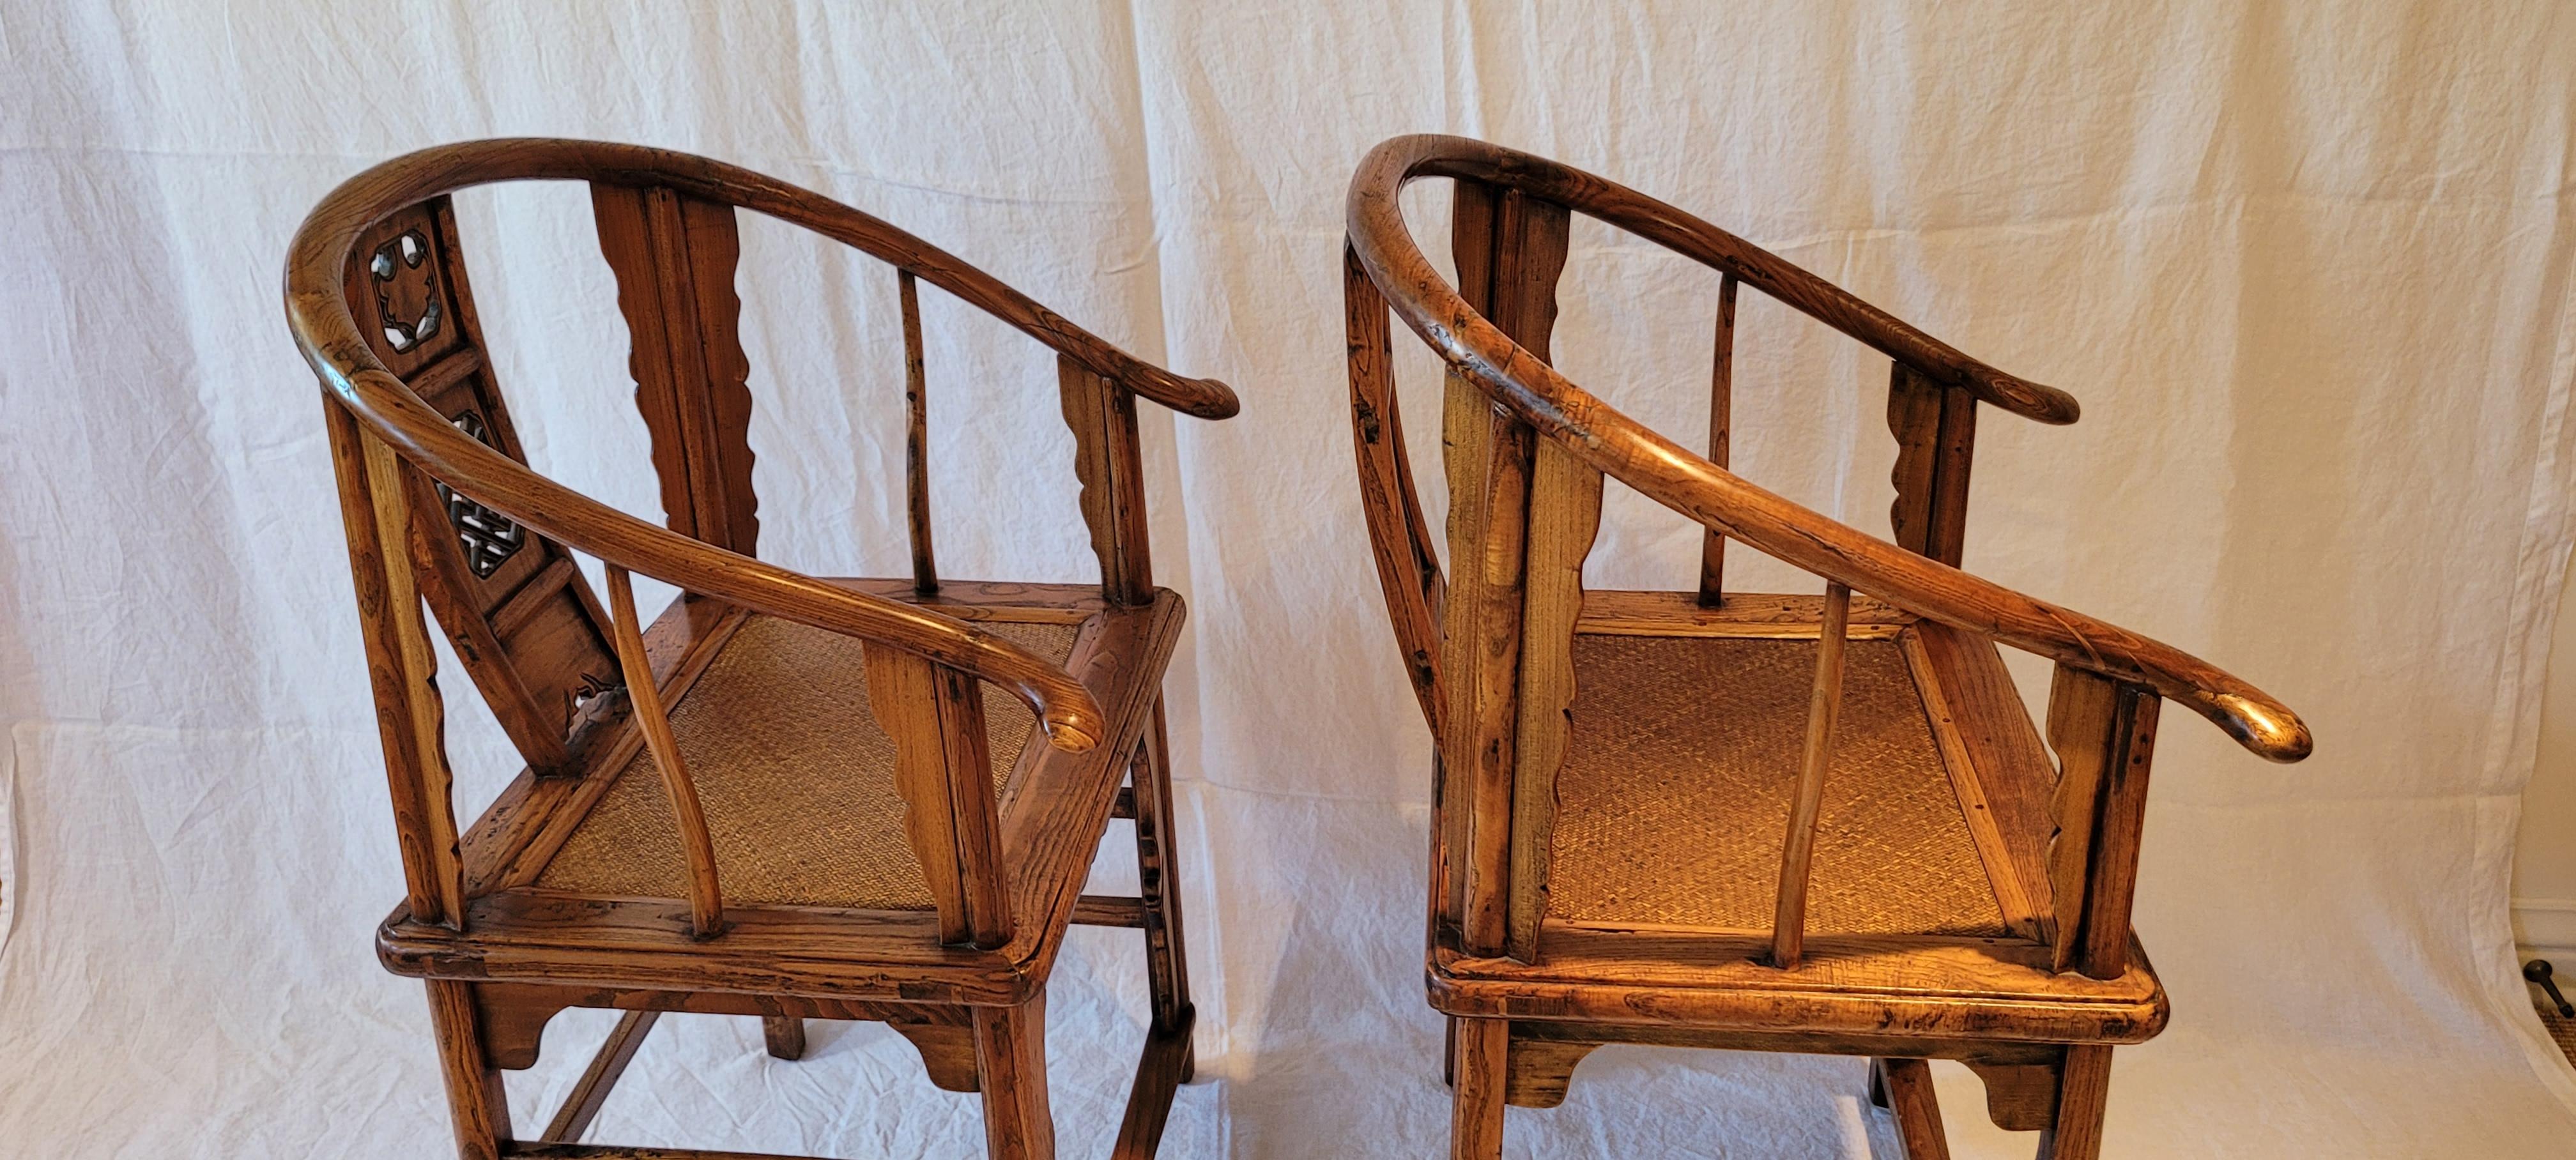 Pair of Horseshoe Back Chairs - mid 19th Century For Sale 5